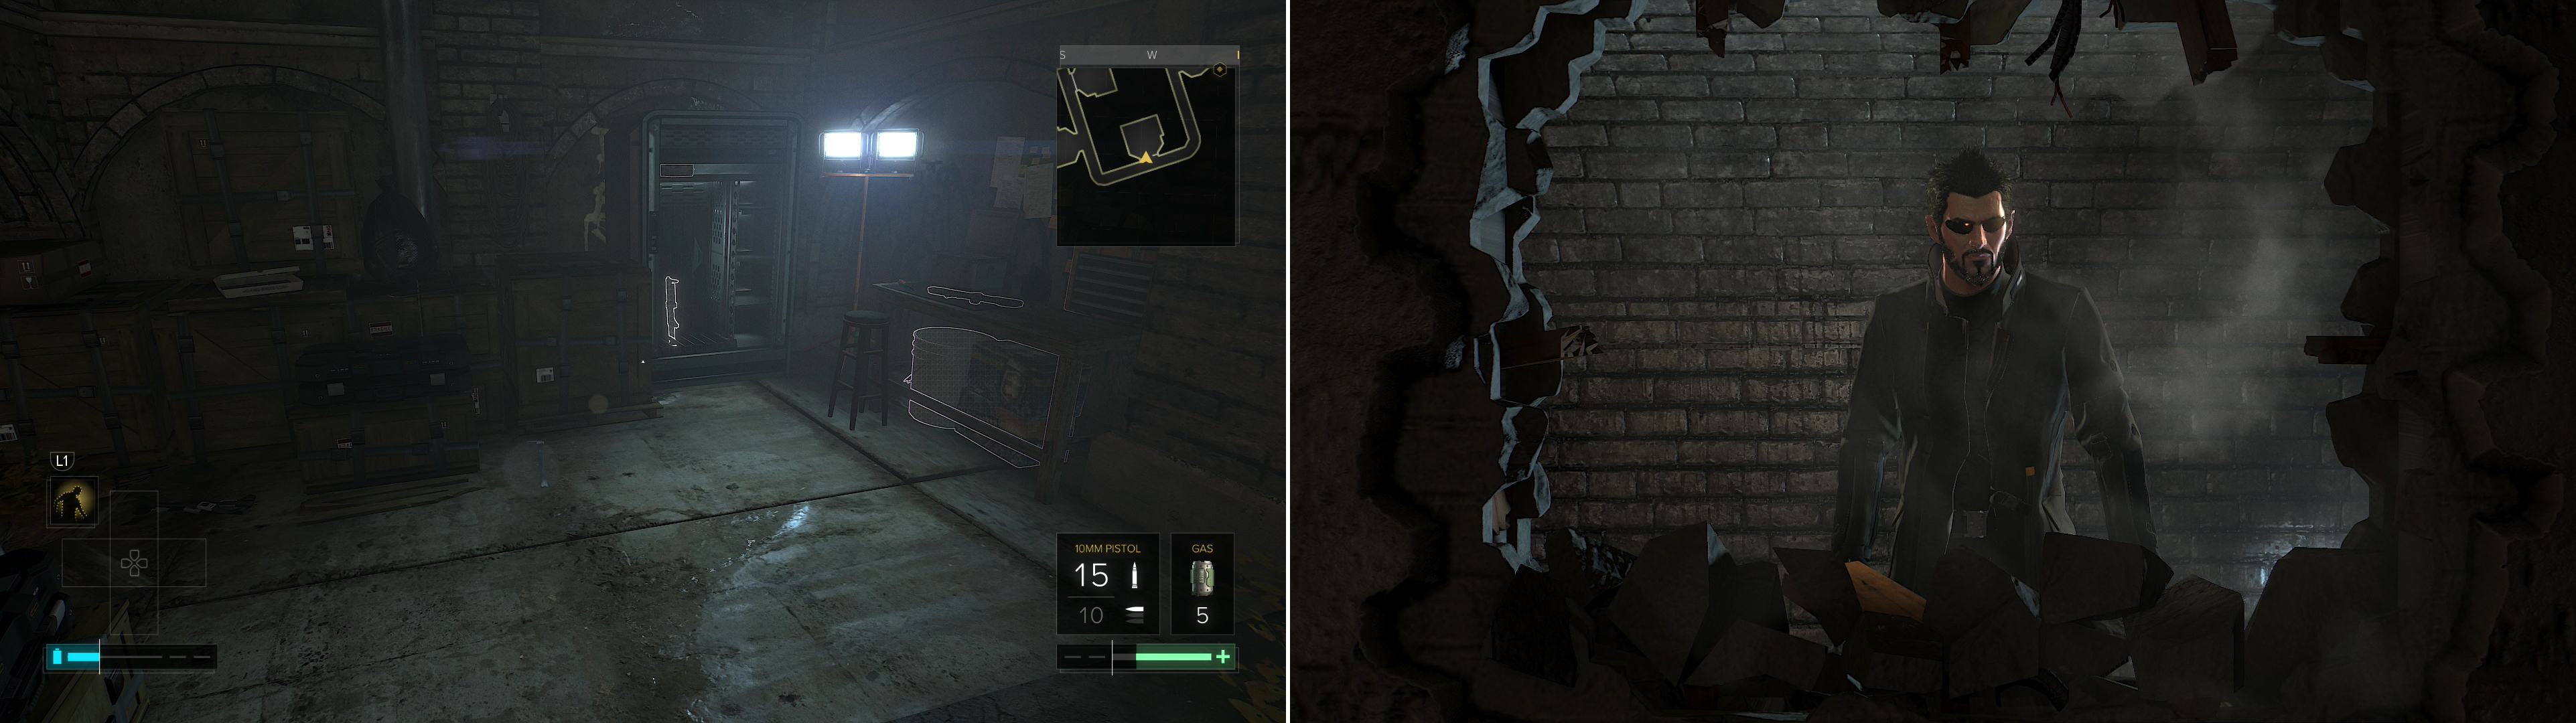 If you can hack a difficult Keypad you'll access a room full of loot (left). Further on, if you smash a hole in a wall you'll find another, somewhat less lucrative room (right).